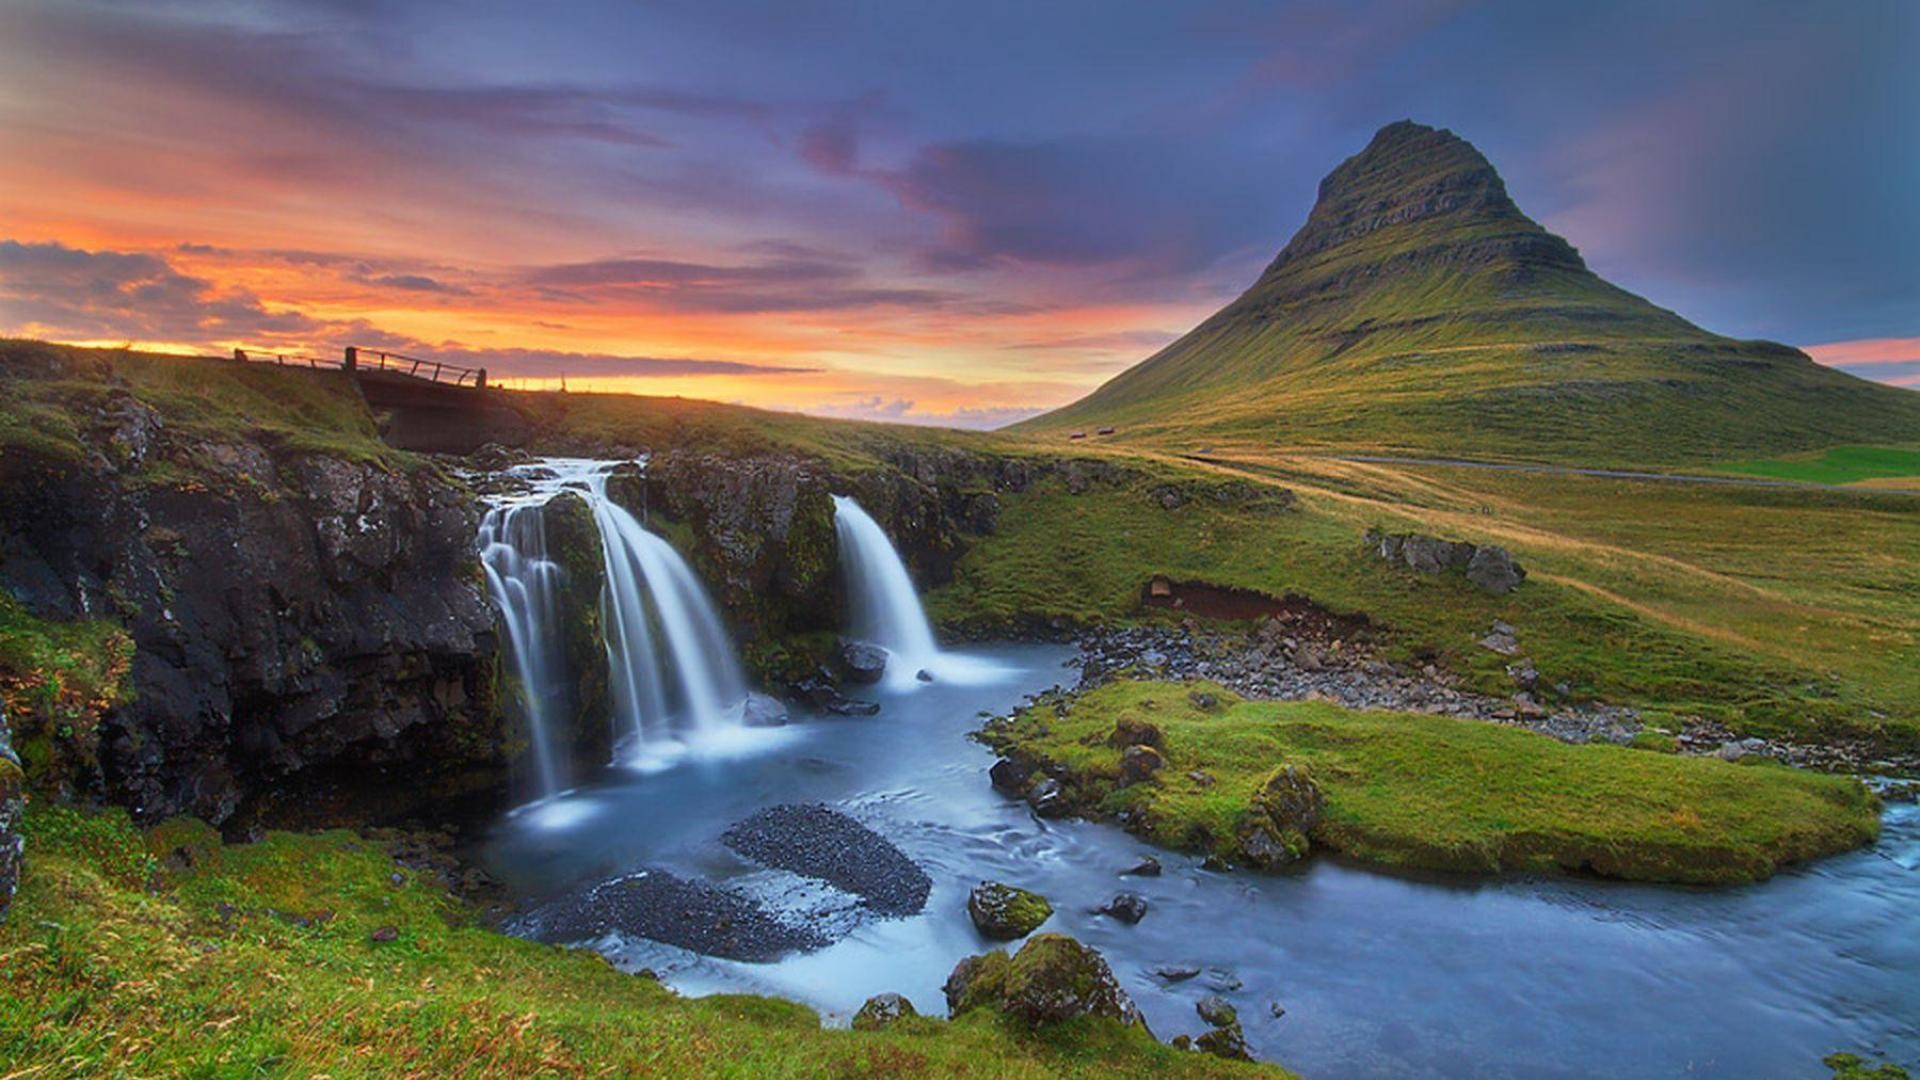 1920x1080 Icelandic Nature Wallpapers Iceland Backgrounds Free Download - Page 2 of 3  - wallpaper.wiki ...